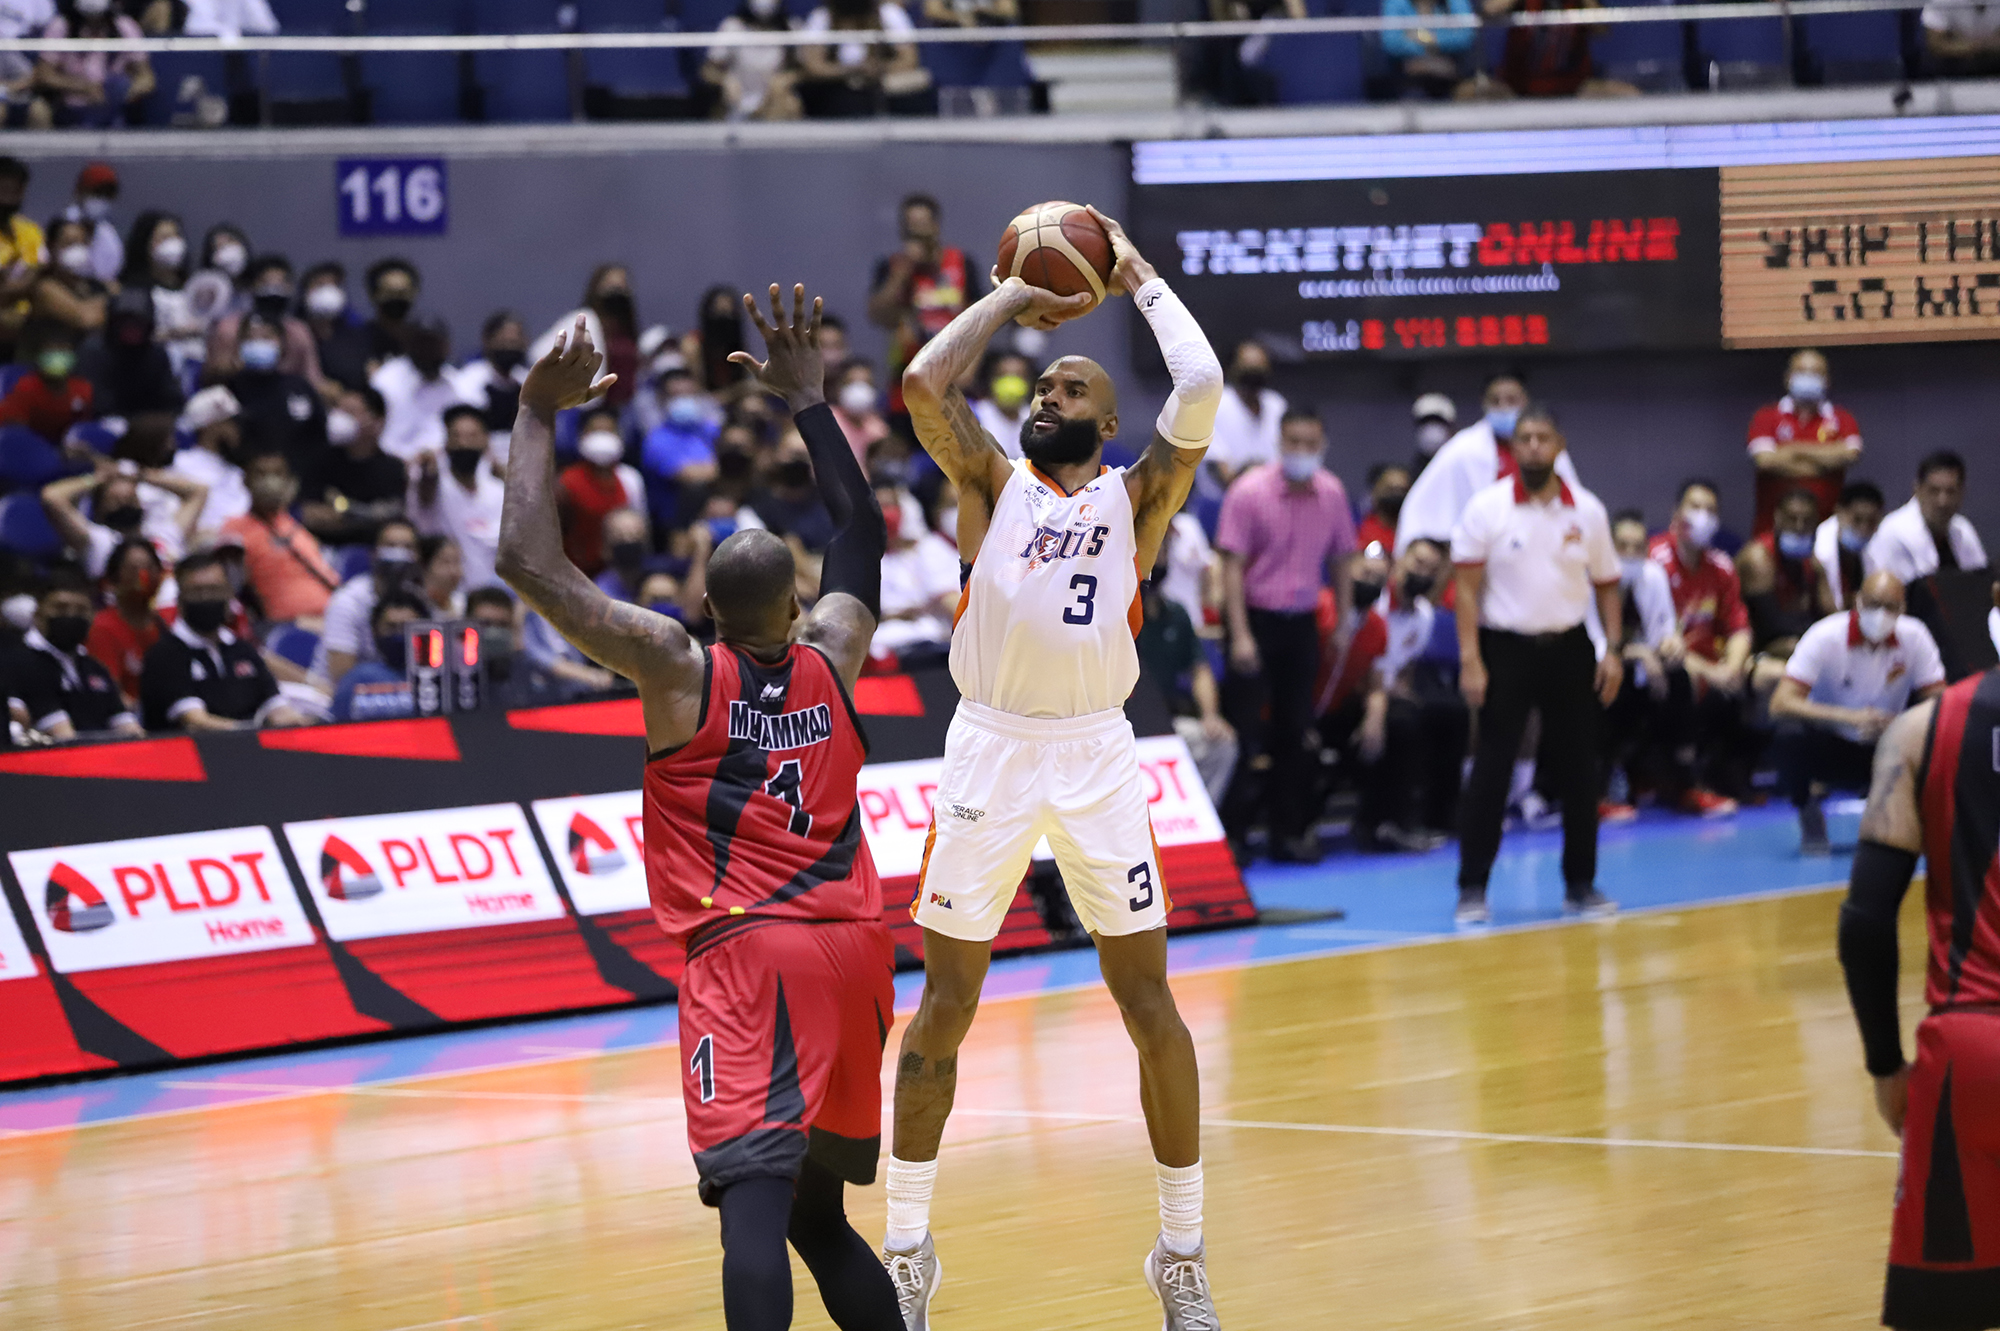 Tony Bishop Jr. (right) sparks the Bolts’ quarterfinal victory over the Beermen. —PBA IMAGES